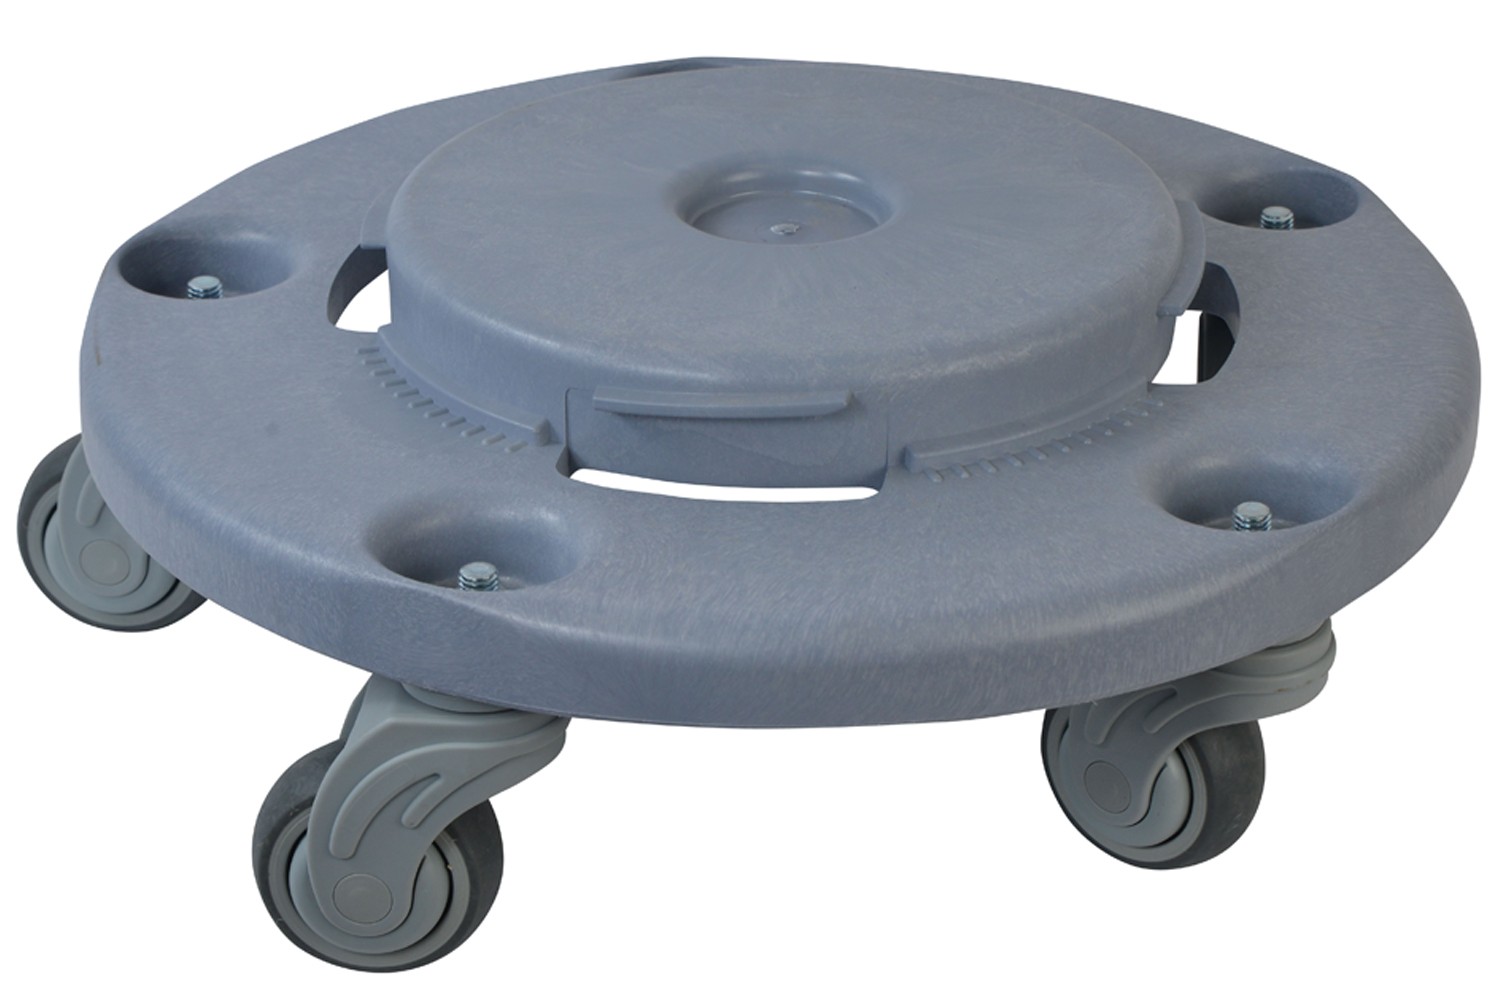 Quiet Garbage Can Dolly, Grey Fits 20, 32, 44, 55 Gallon